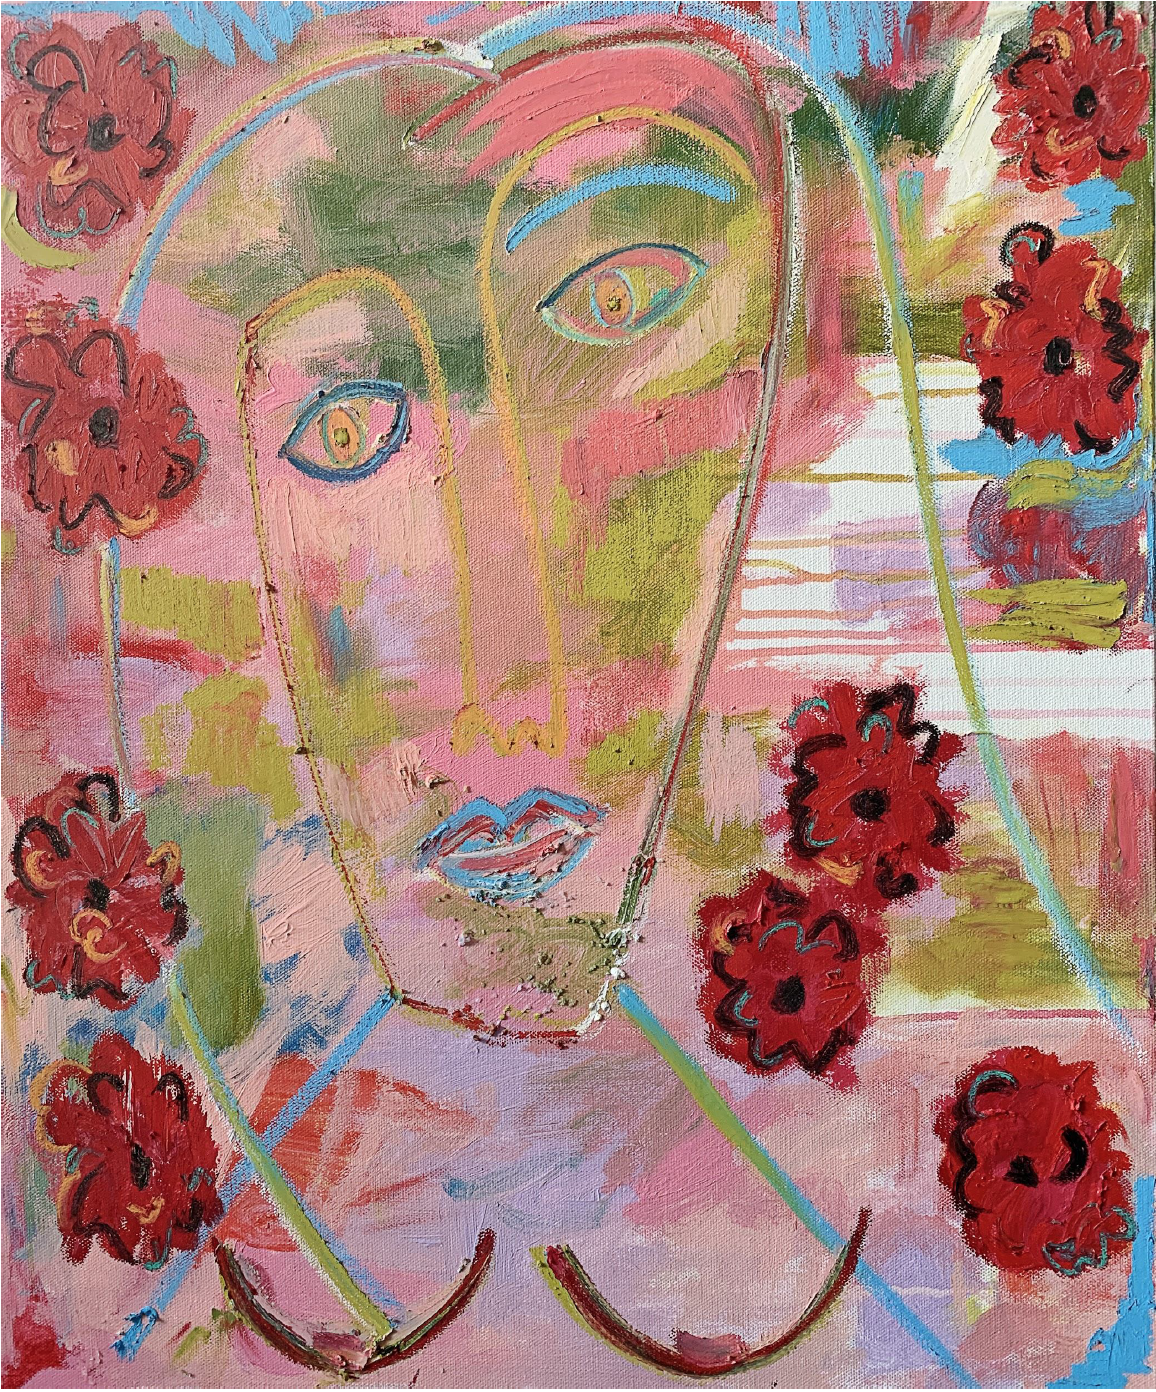 Self-Portrait With Poppies by Monica Shulman